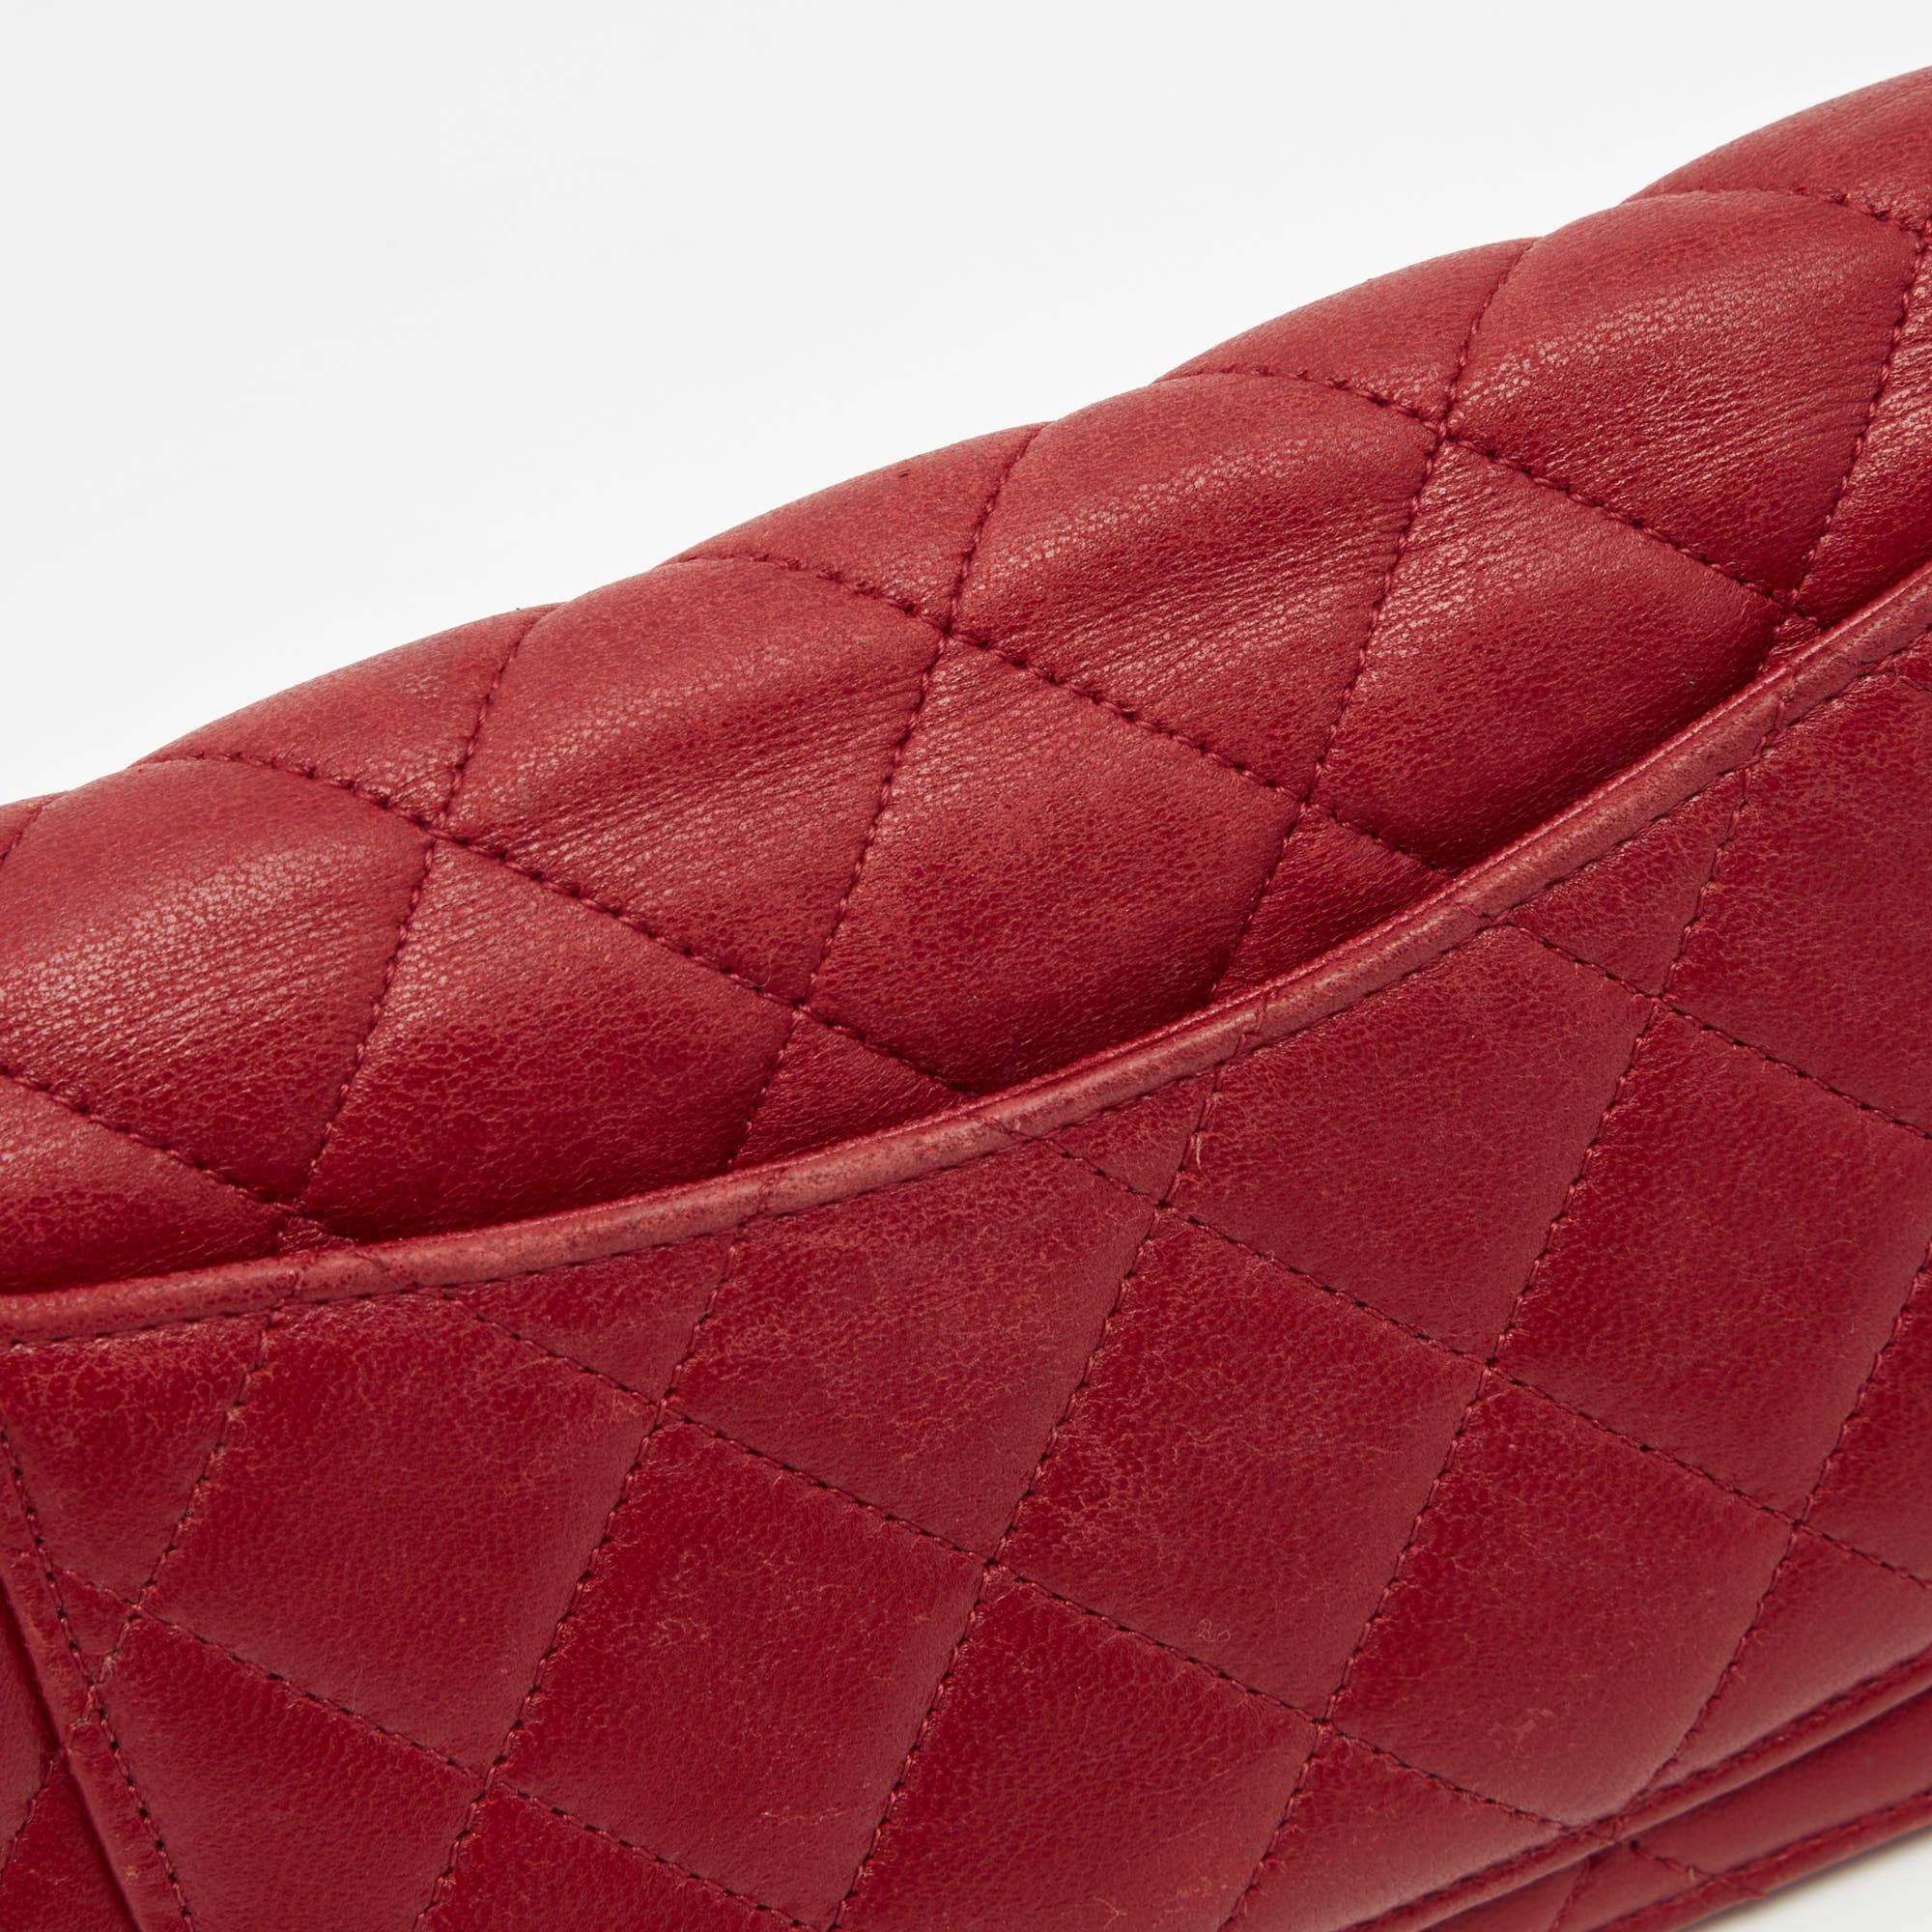 Timeless/classique leather wallet Chanel Red in Leather - 32120572